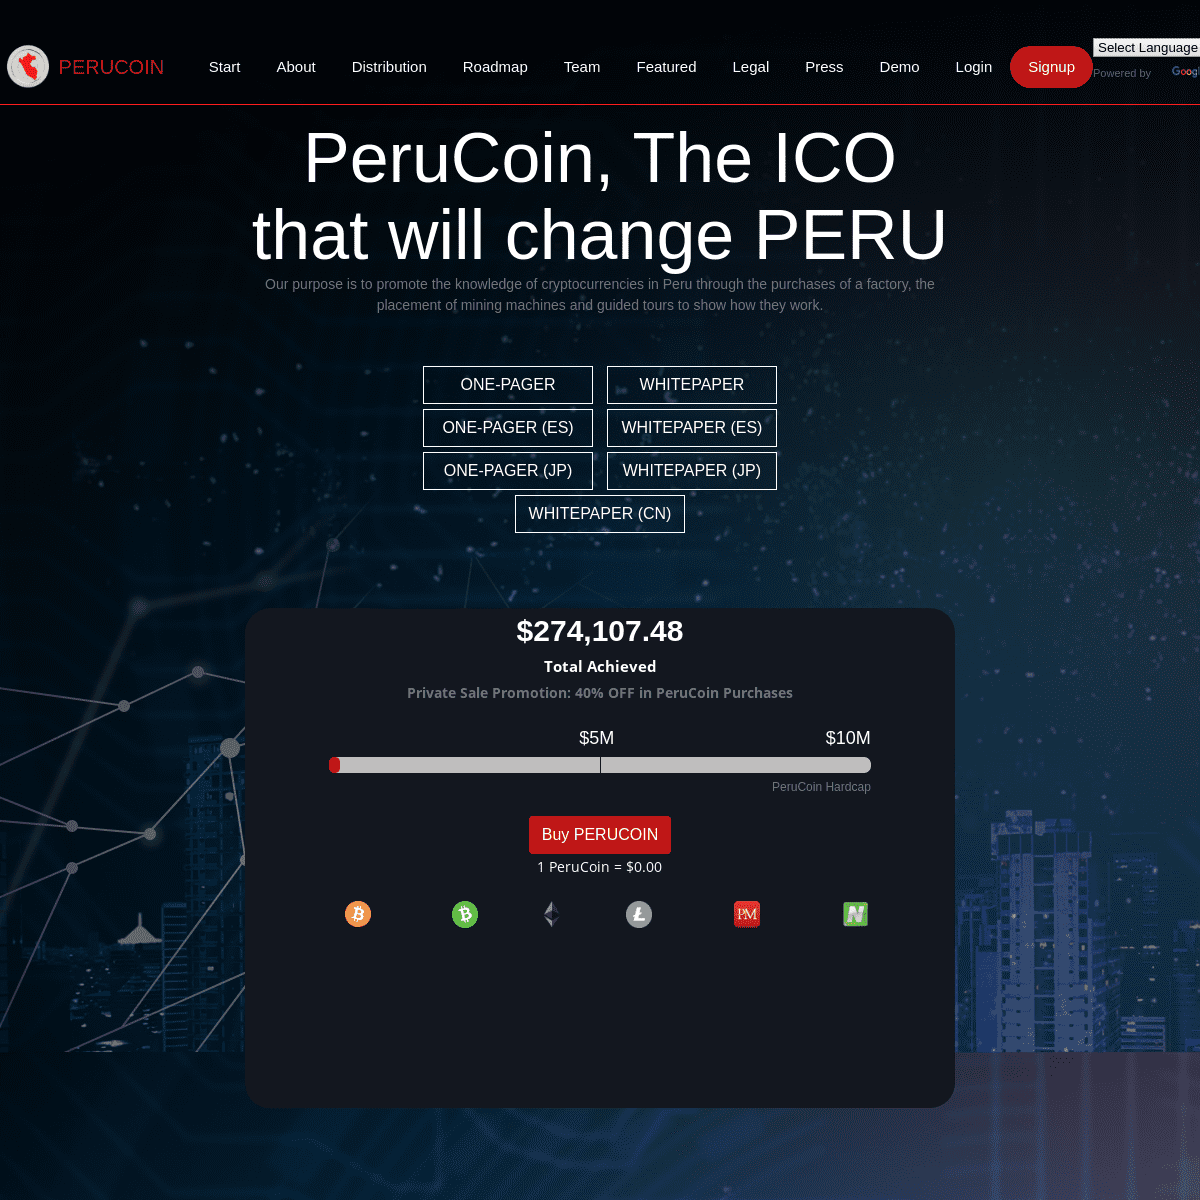 A complete backup of perucoin.com.pe